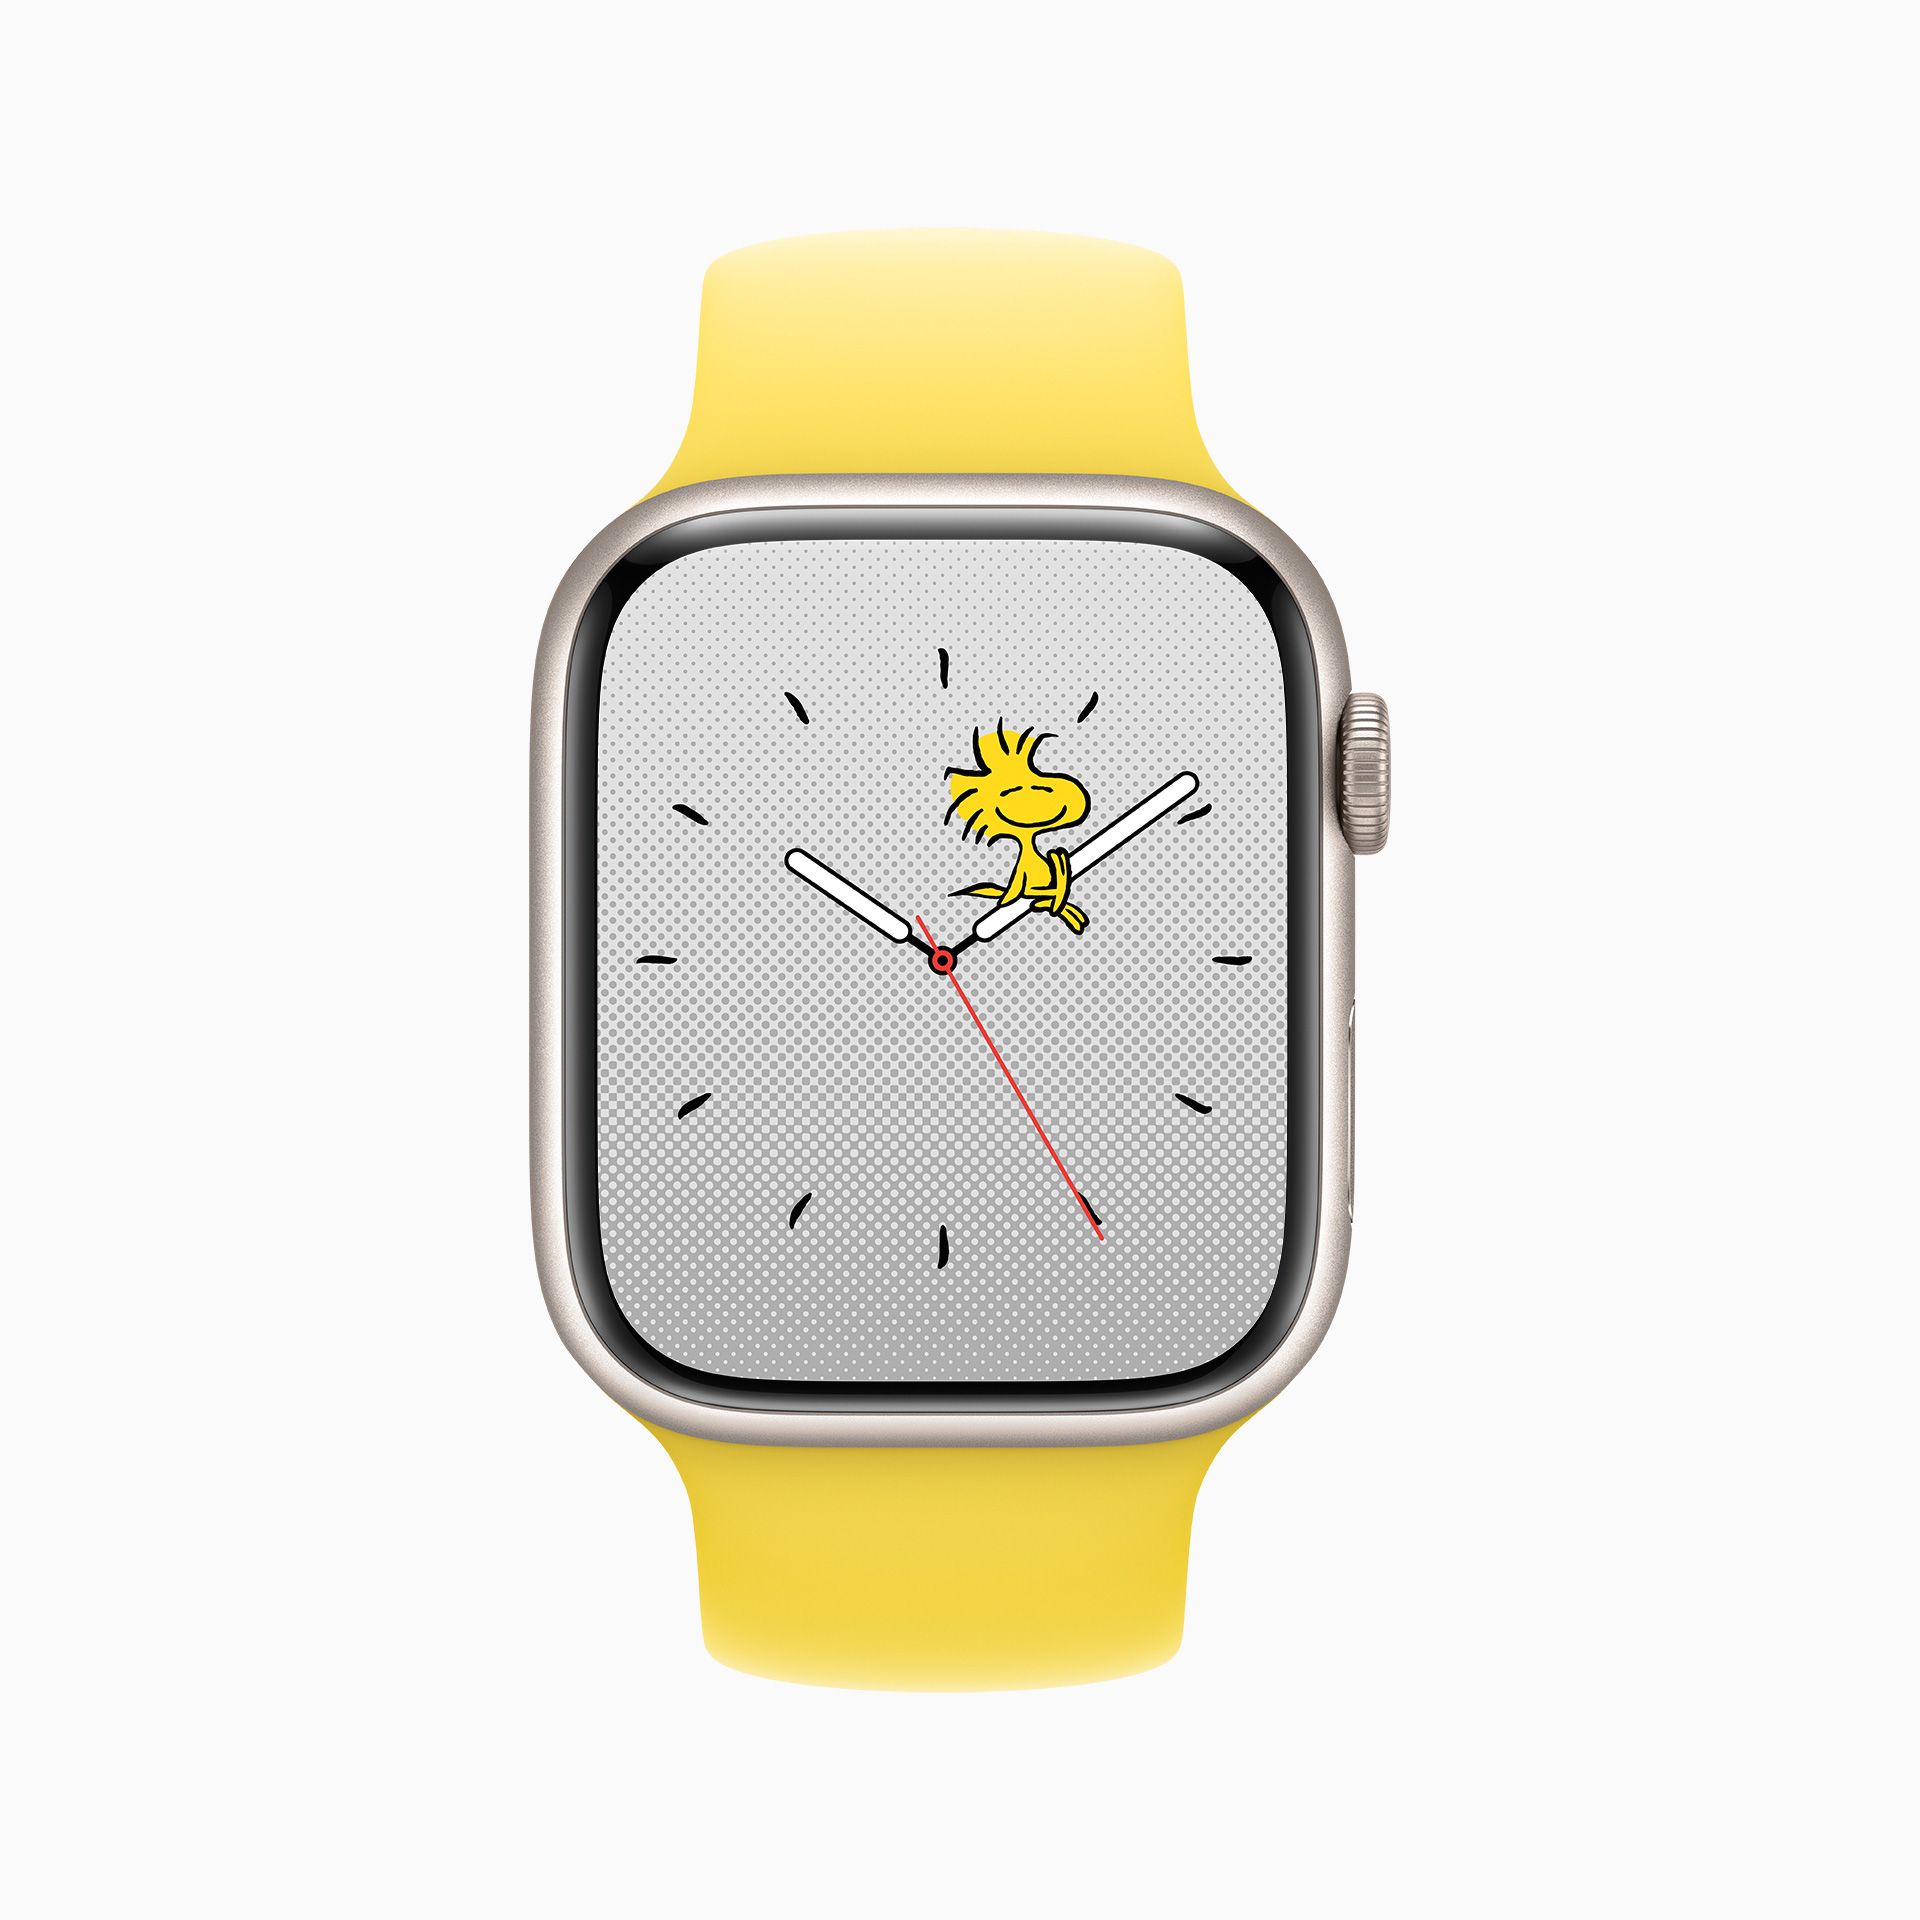 Introducing watchOS 10, a milestone update for Apple Watch - Apple